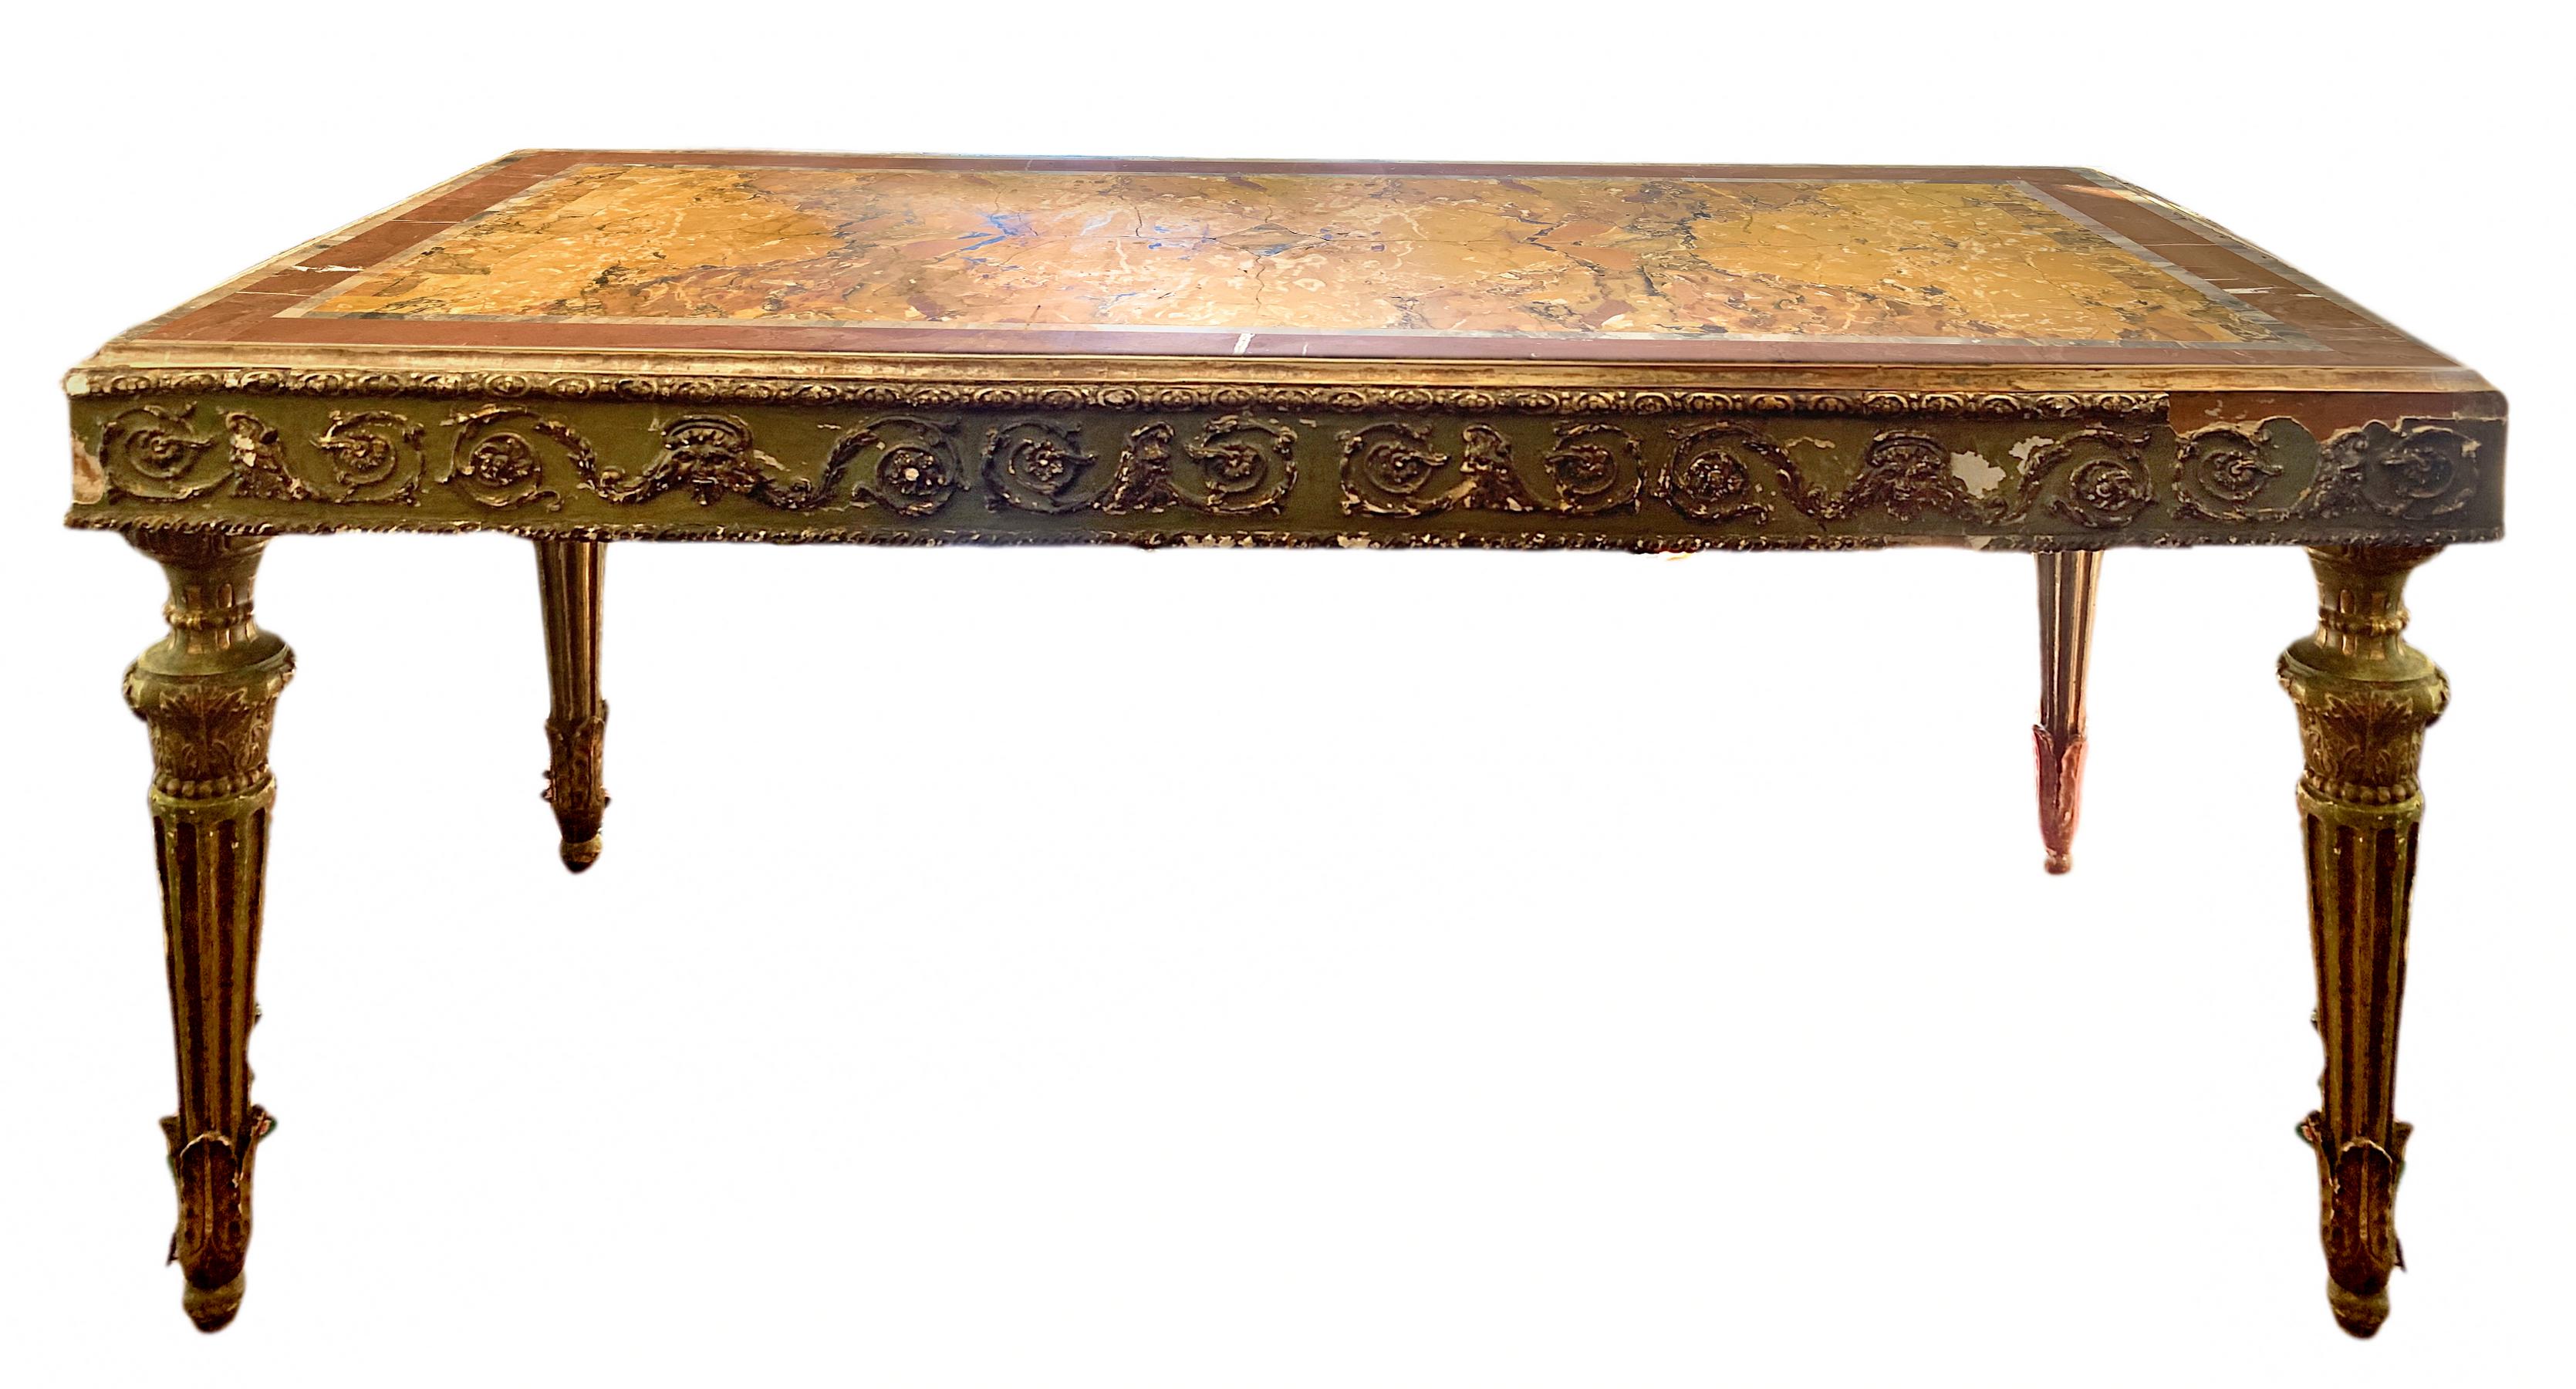 Green lacquered table with yellow Siena marble, early nineteenth century. H 81x180 cm, depth 90